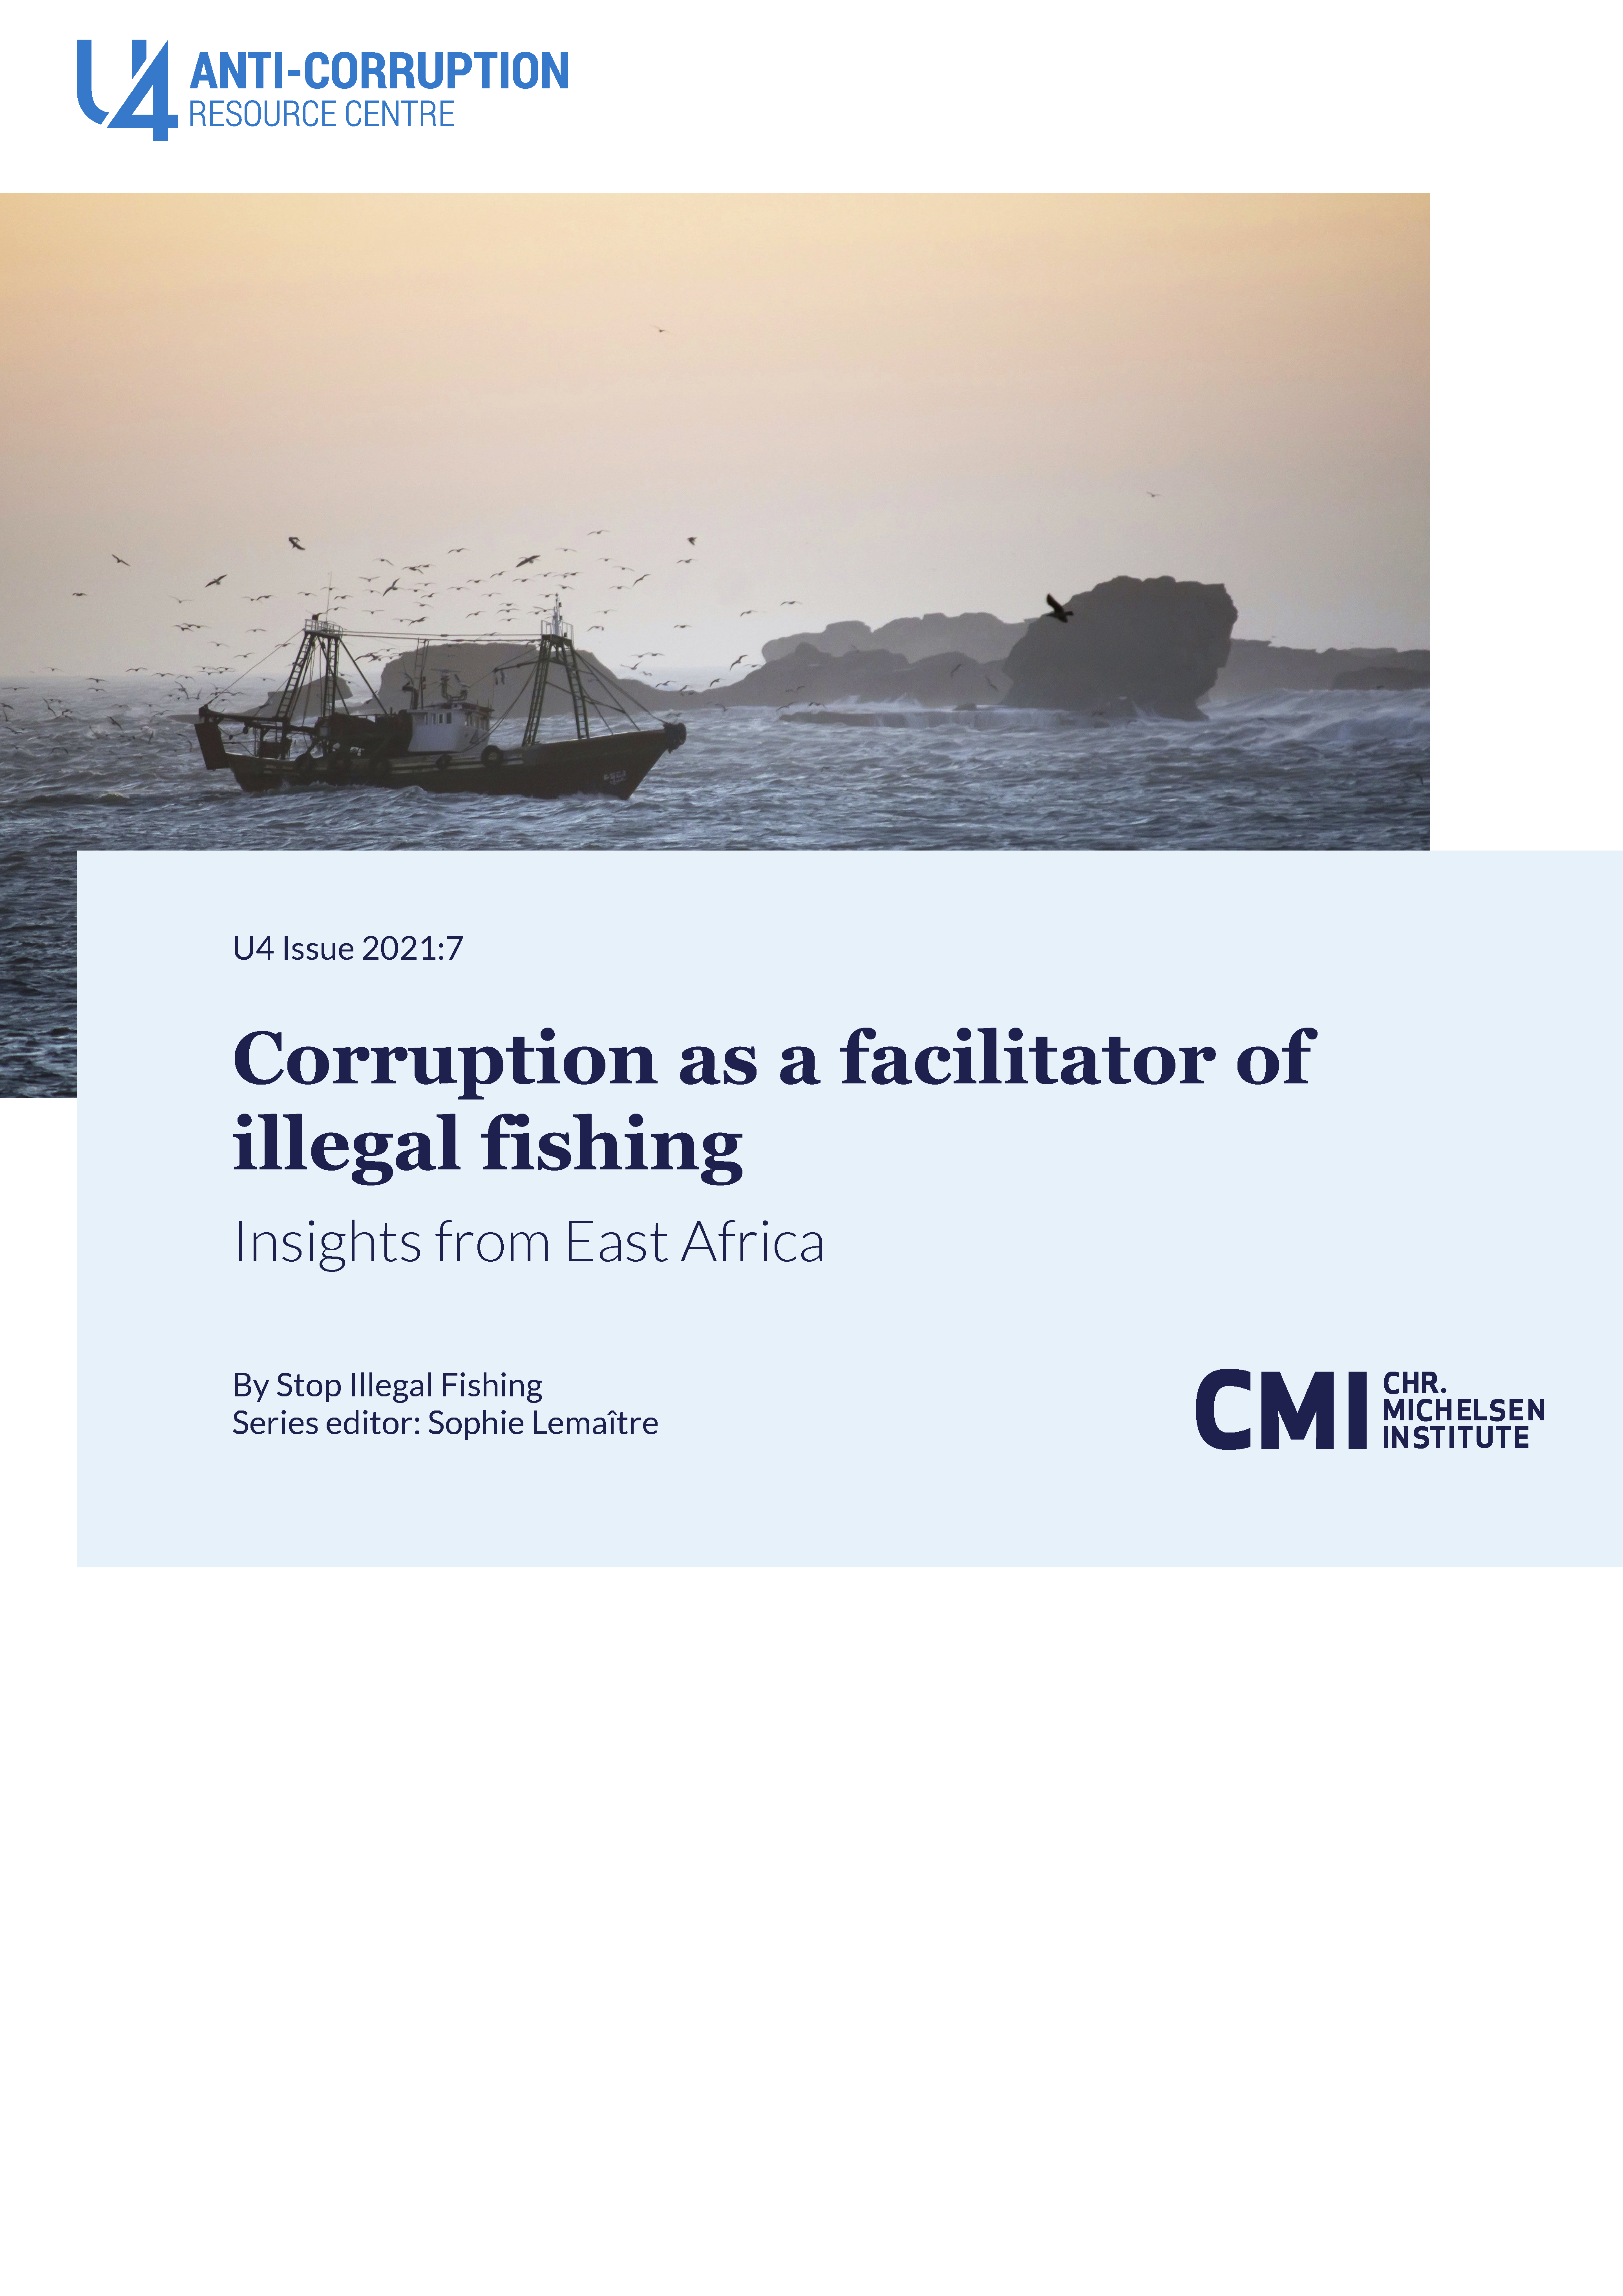 Corruption as a facilitator of illegal fishing: Insights from East Africa